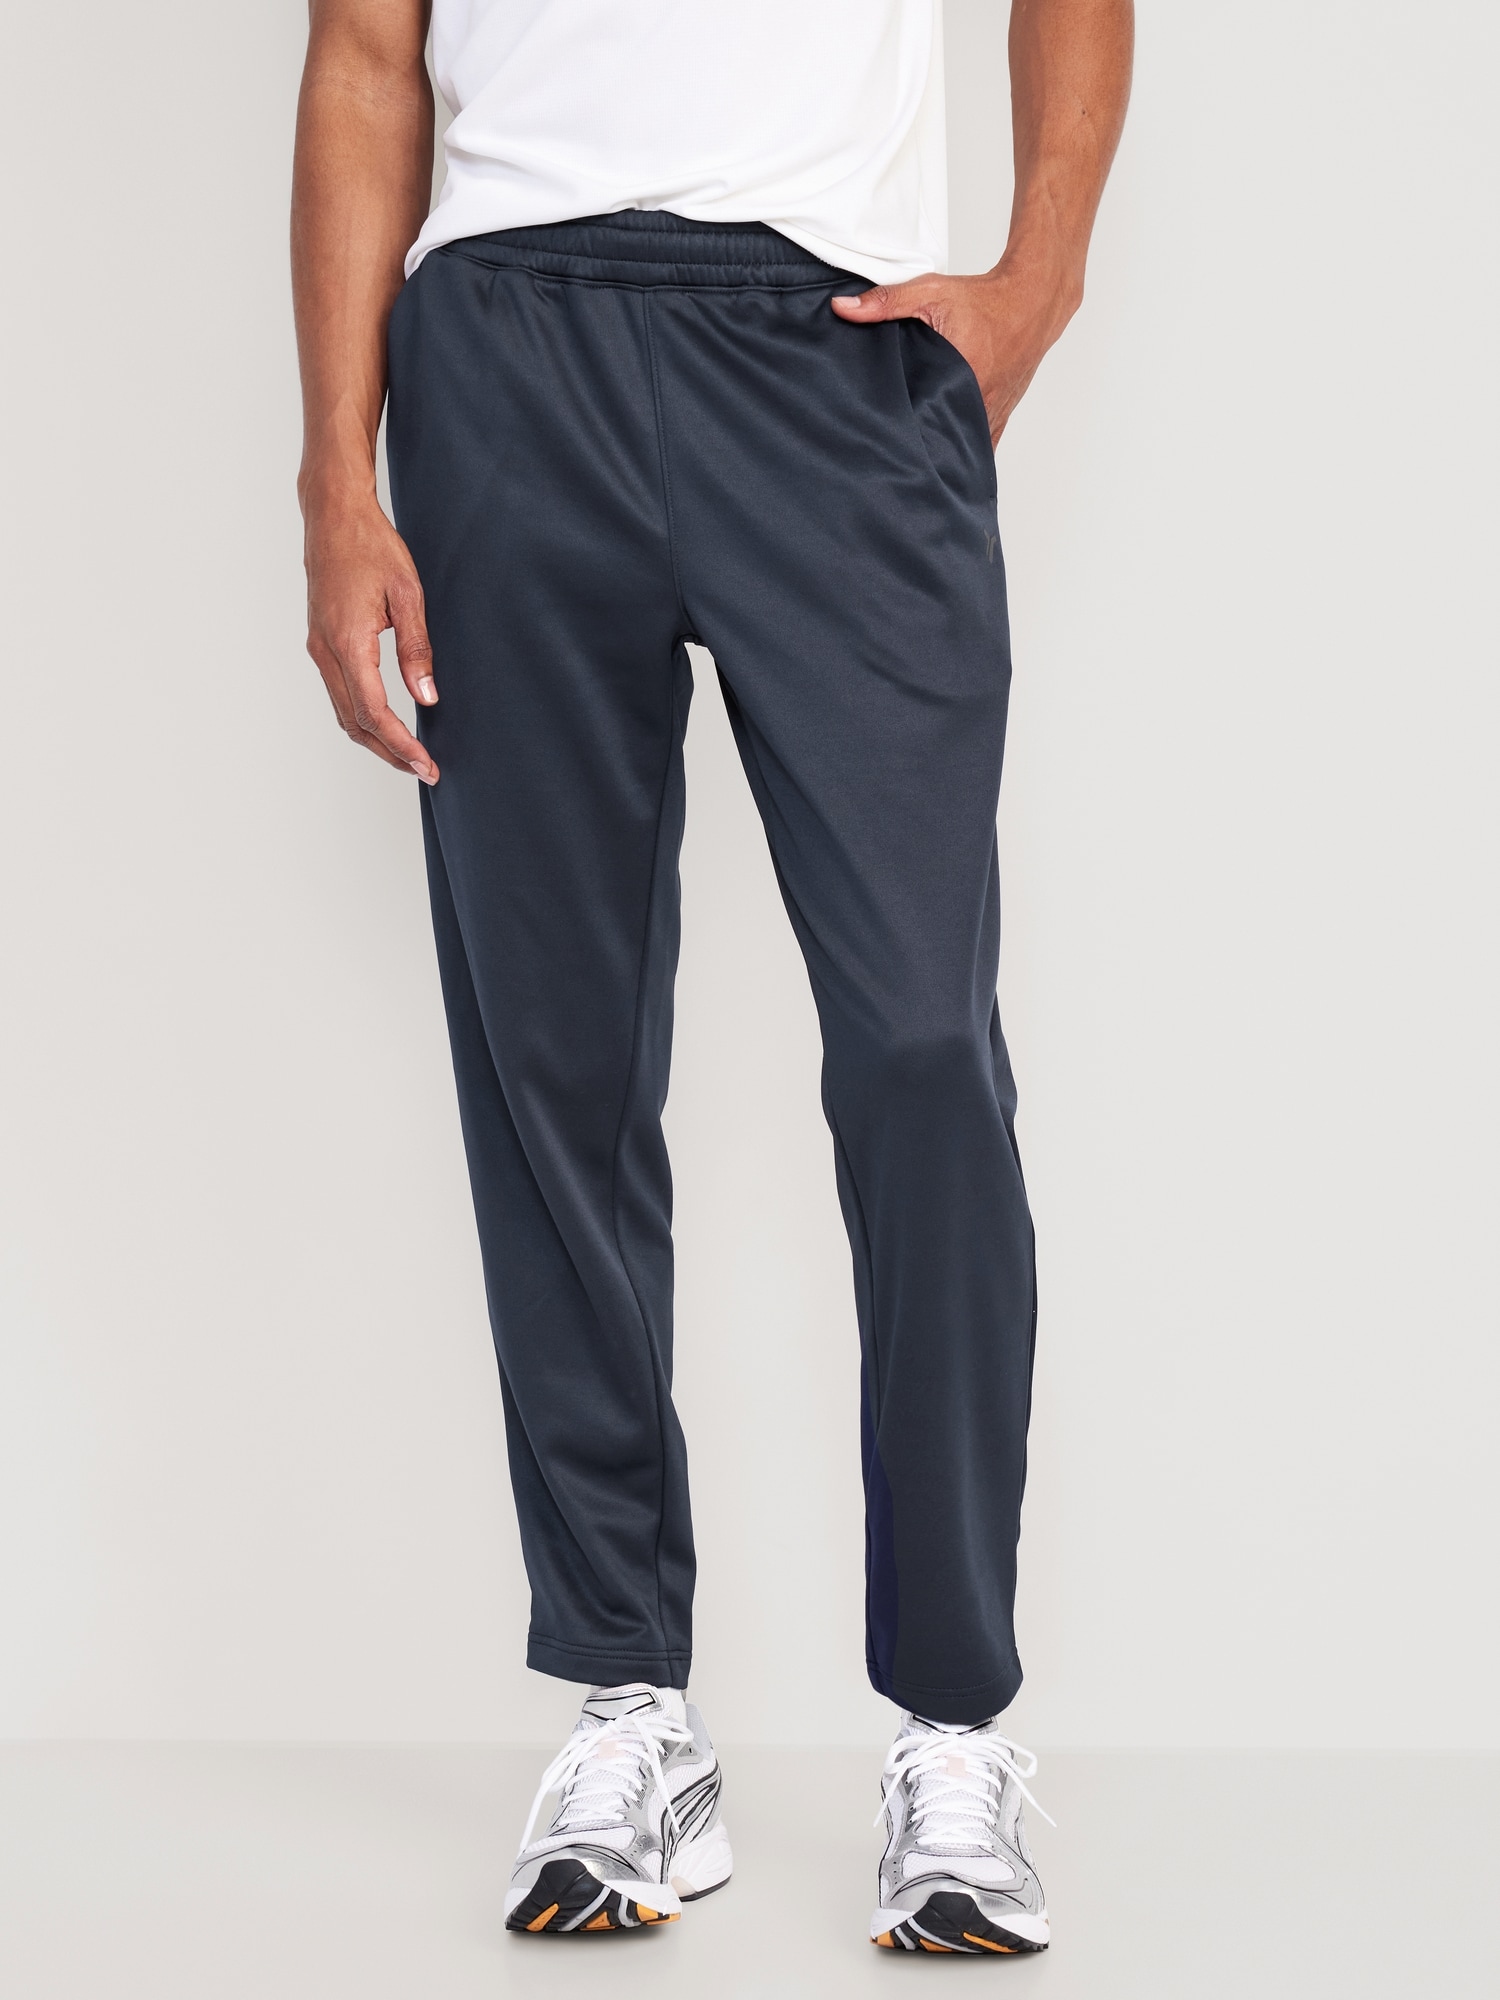 DBURKE Track Pants for Men and Women